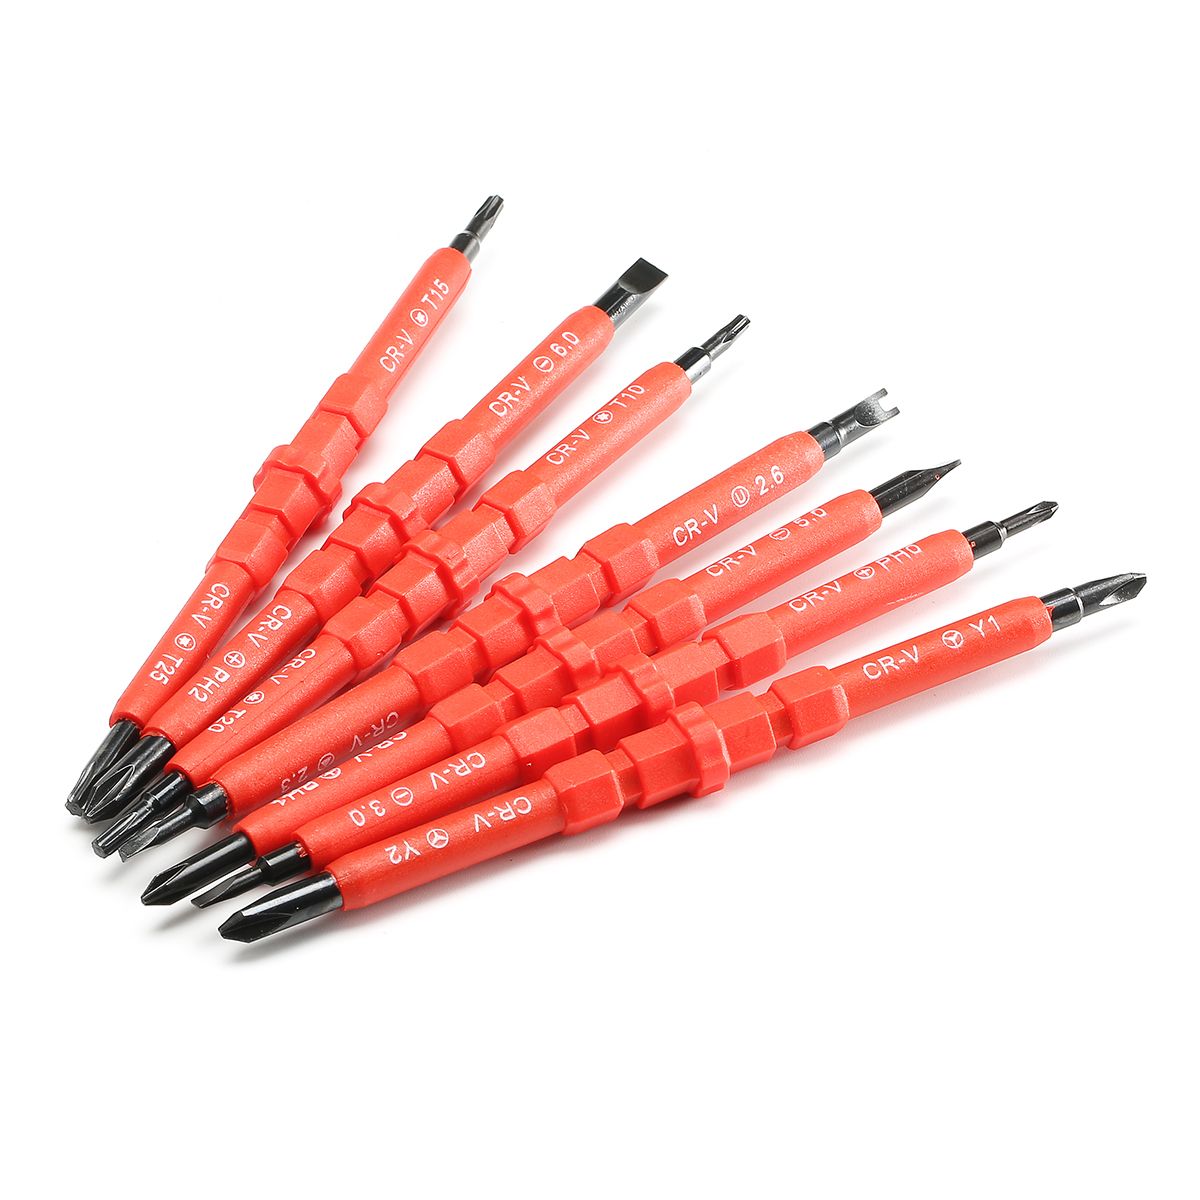 Drillpro-7pcs-Electronic-Insulated-Hand-Screwdriver-Tools-Accessory-Set-1150808